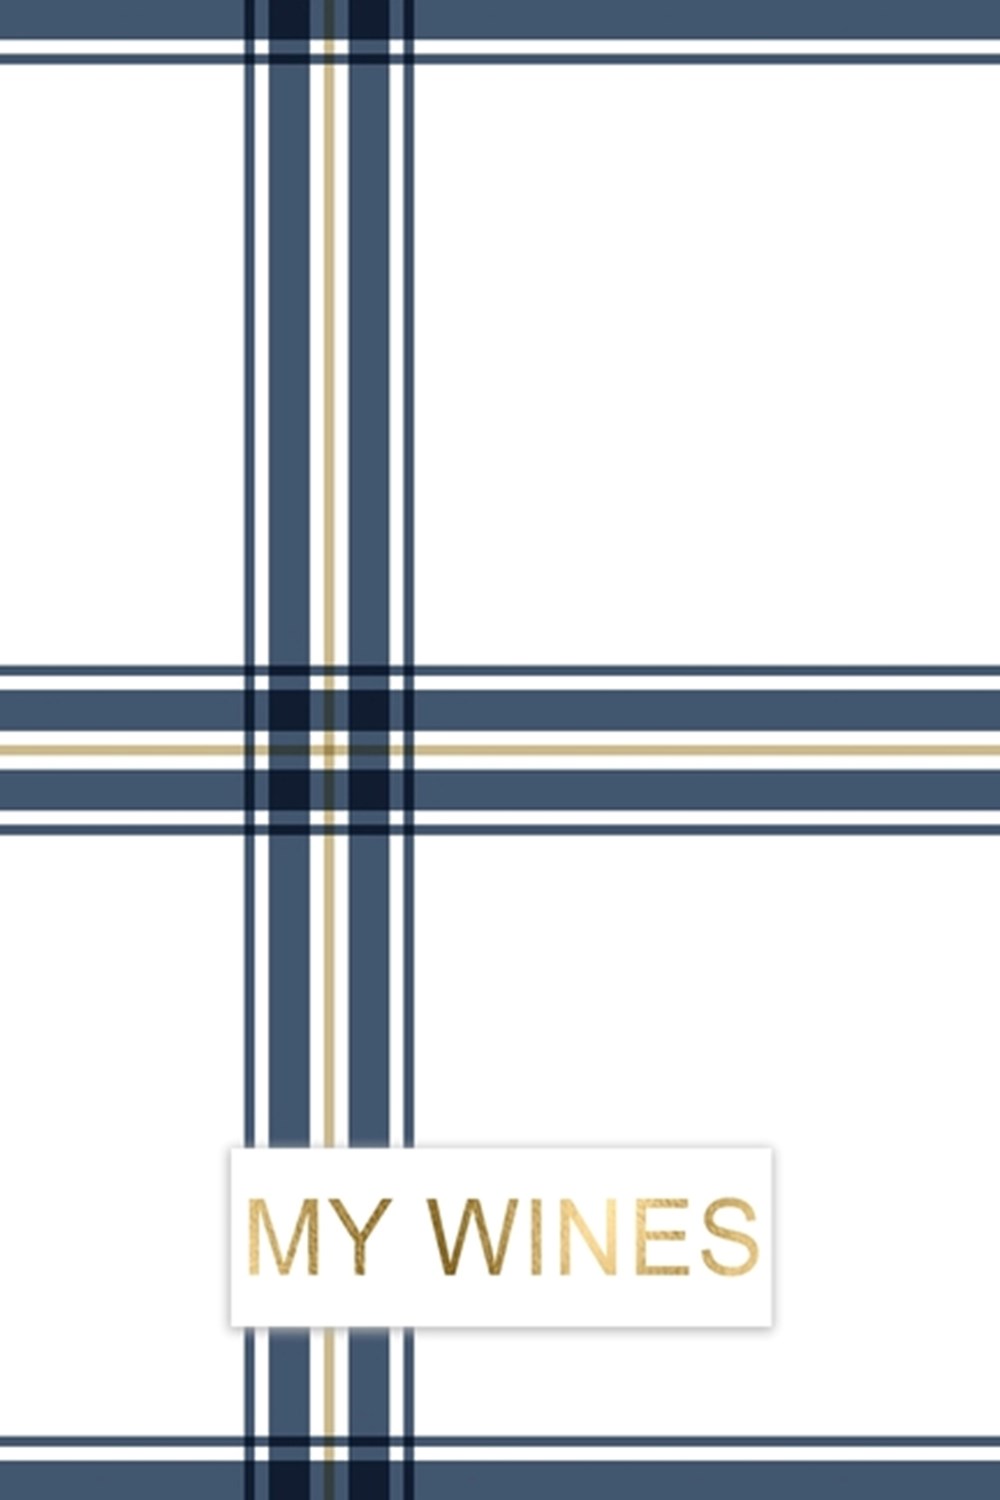 My Wines Blank Wine Score Cards for Wine Connoisseurs, Wine Lovers and Wine Tasting or Degustation E